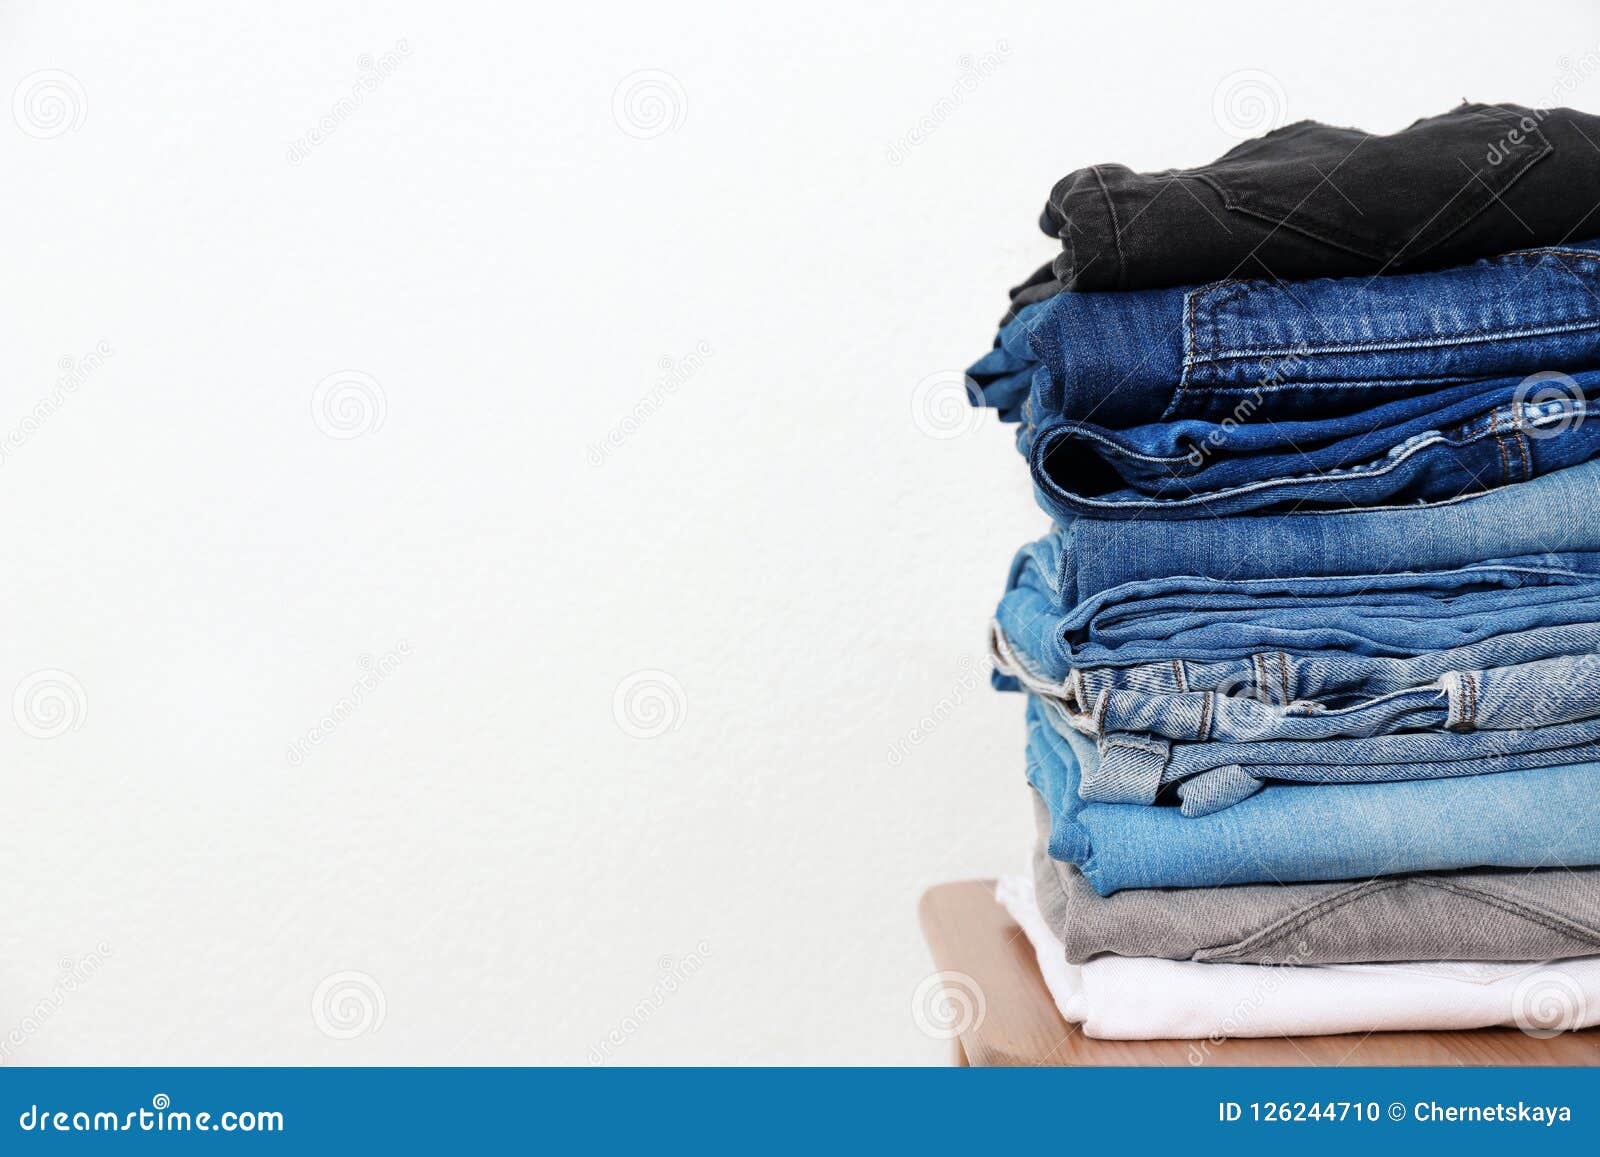 Stack of Different Jeans on Table Stock Photo - Image of denim, clean ...